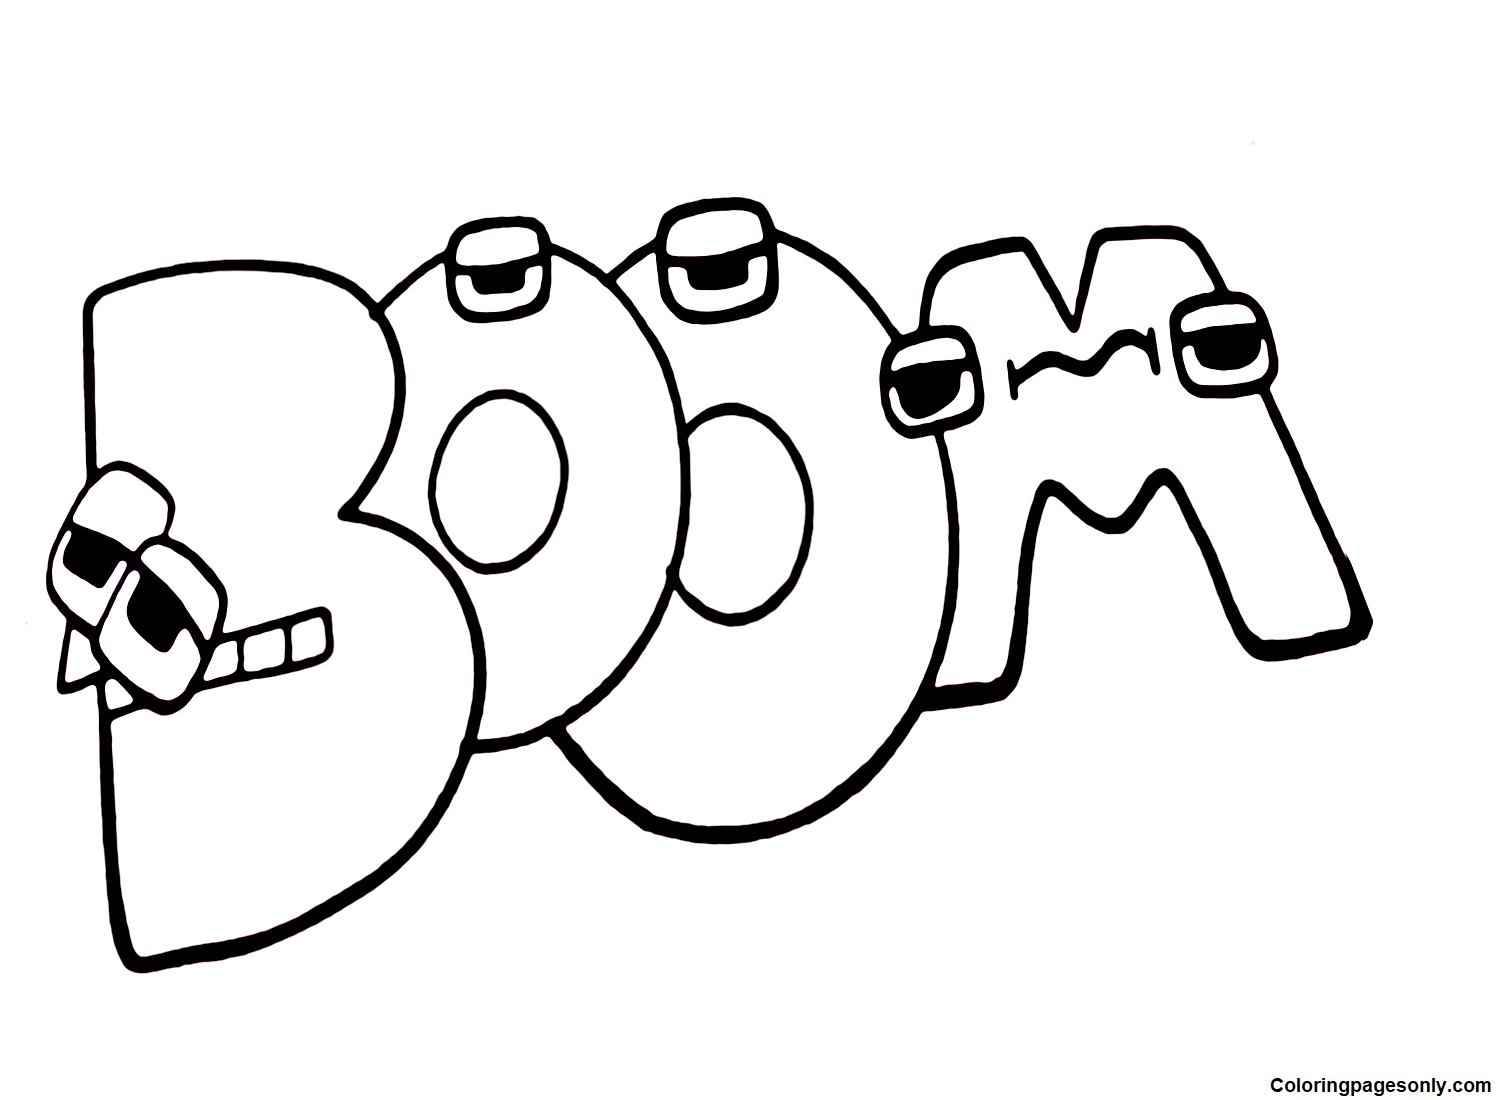 BOOM From Alphabet Lore Coloring Pages